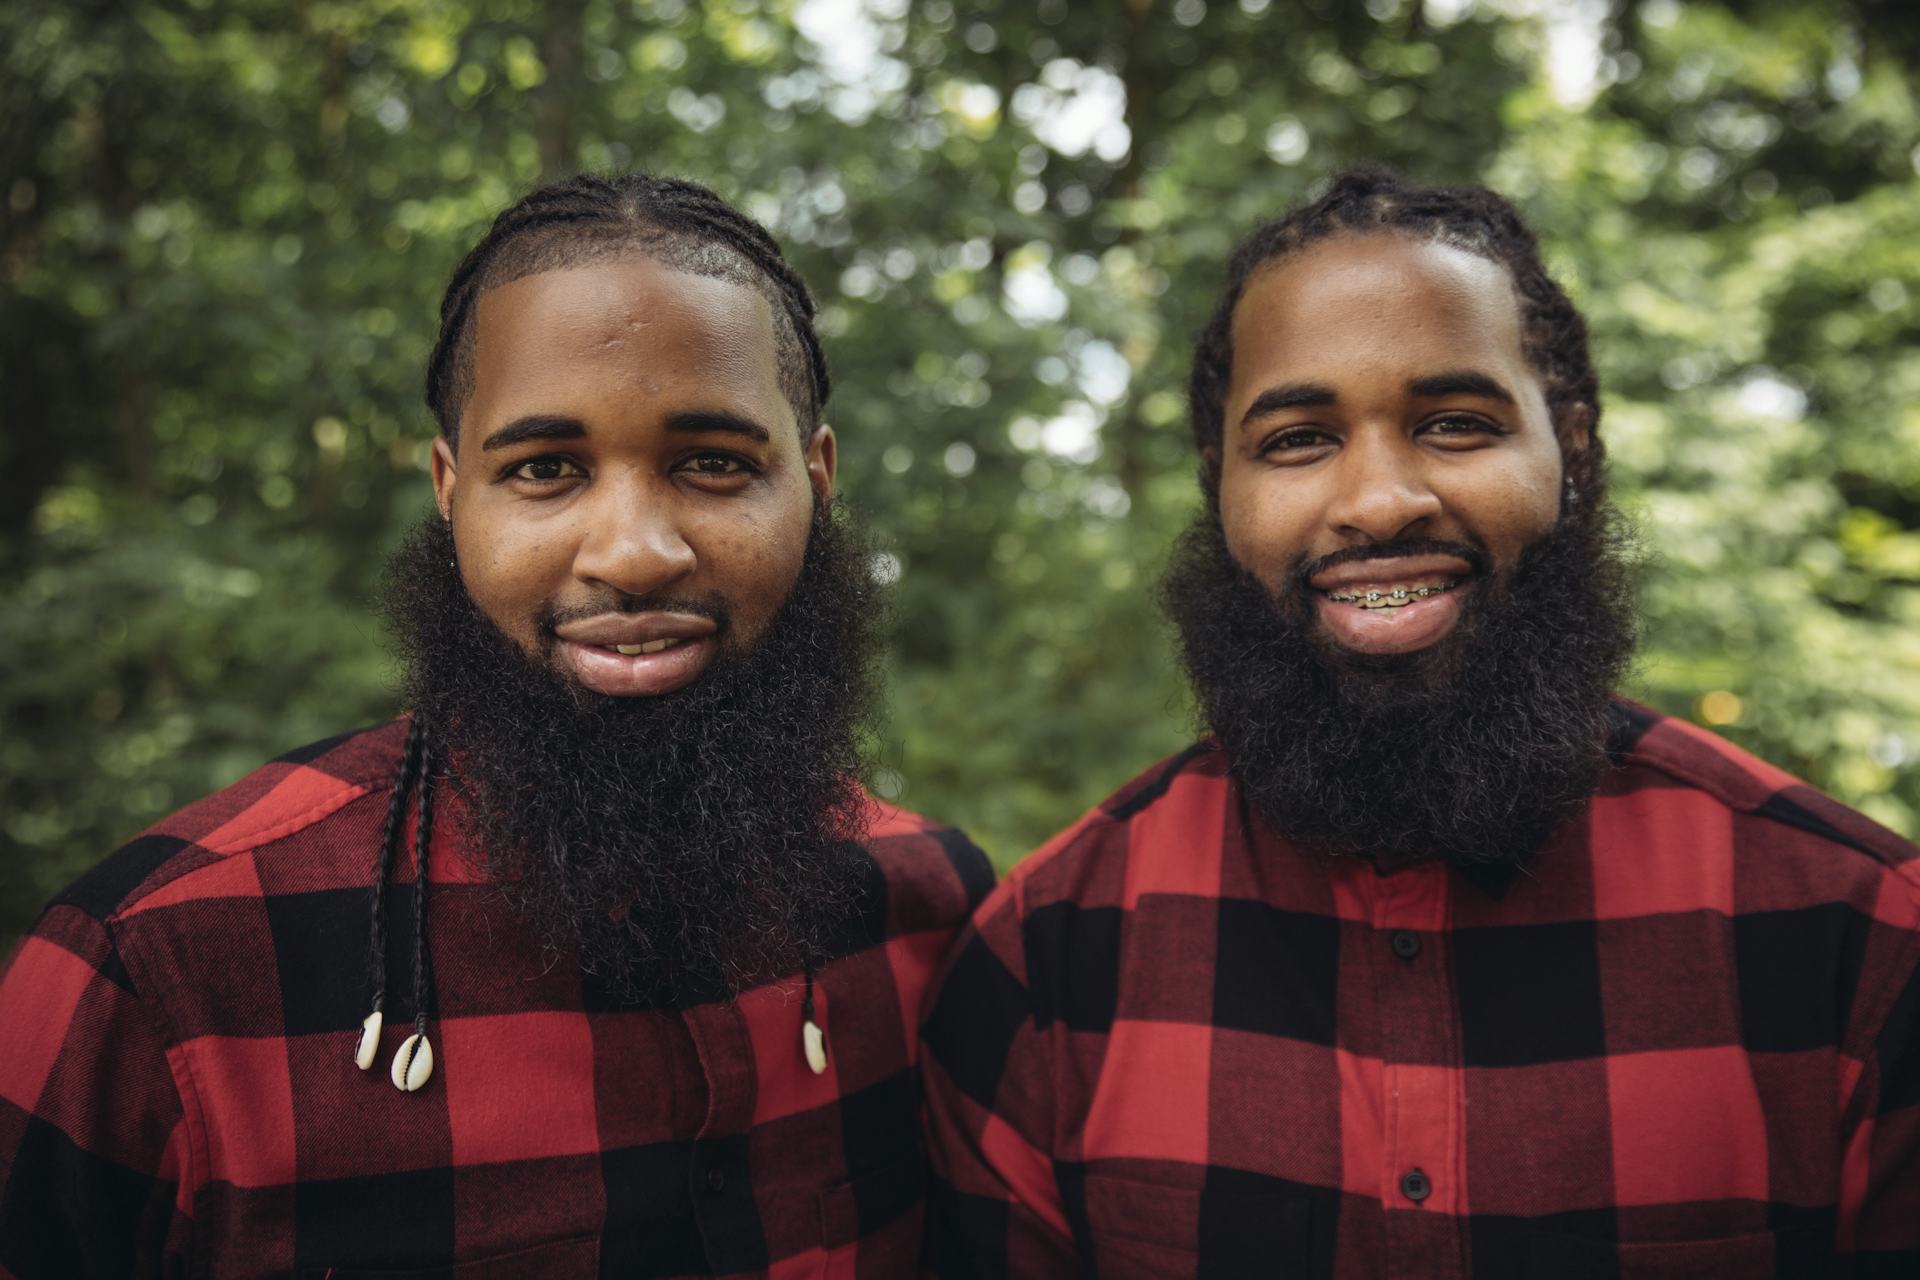 Researchers May Have Finally Discovered Why Identical Twins Exist